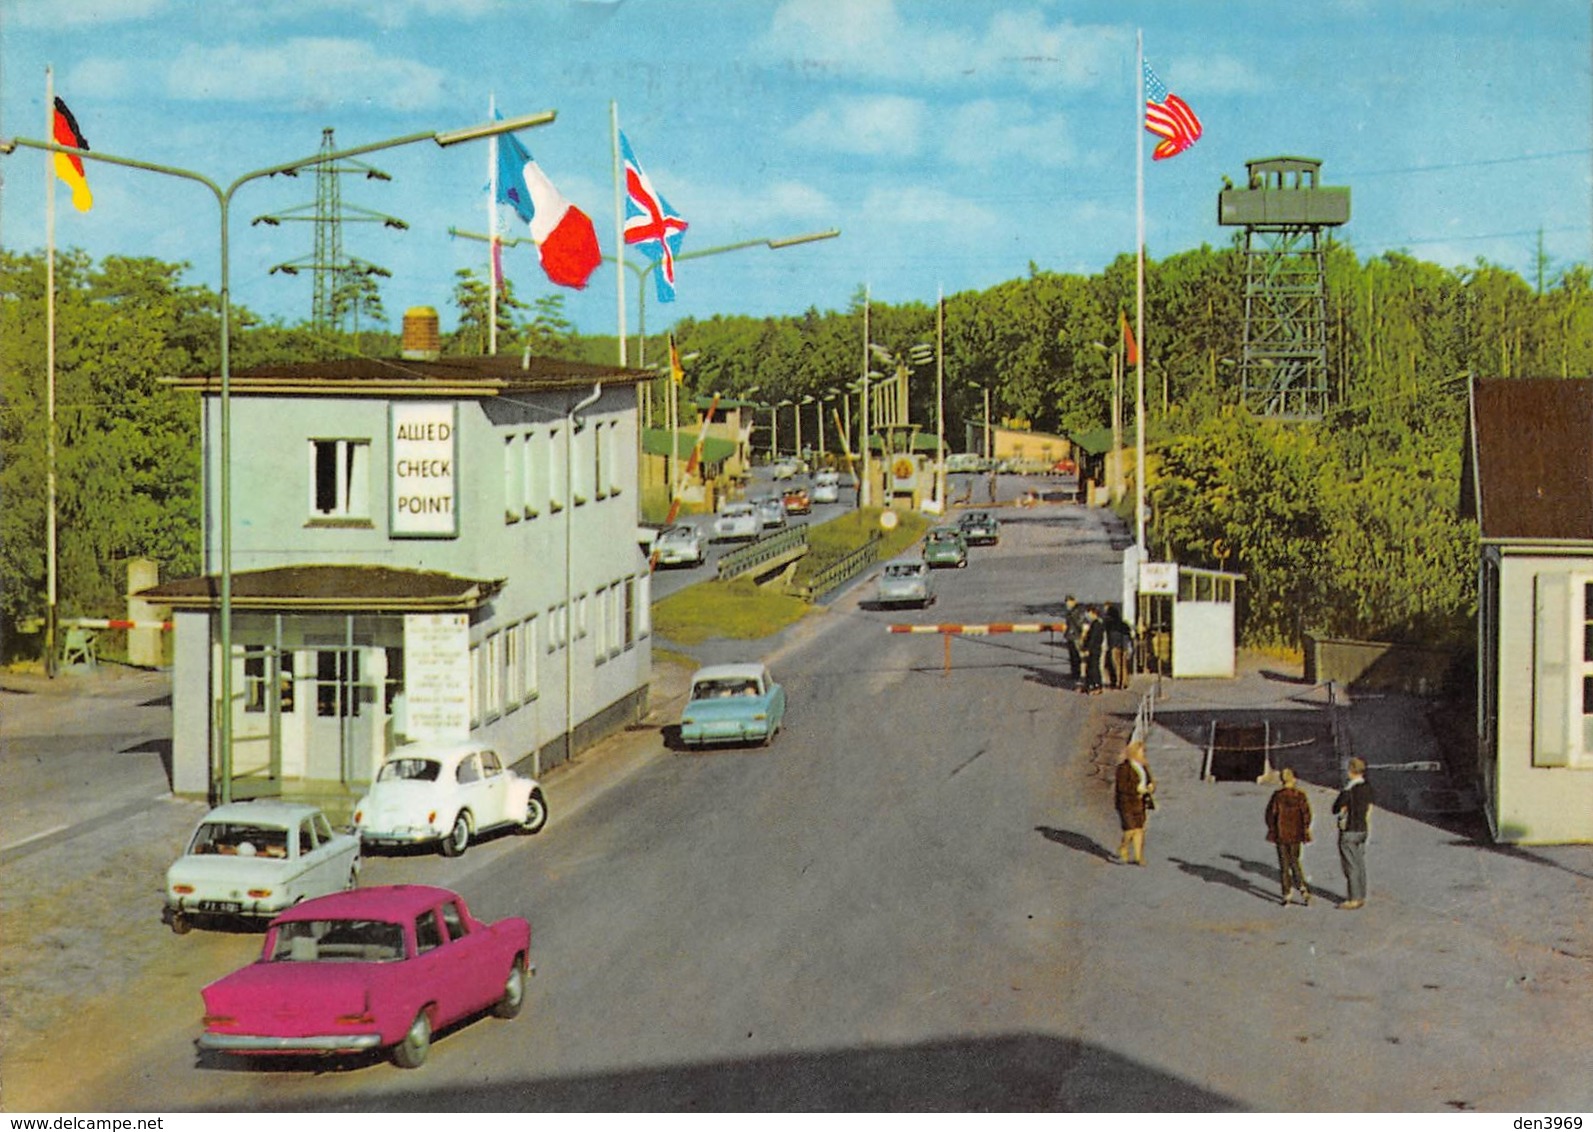 Allemagne - Basse-Saxe - HELMSTEDT - Zonengrenze - Douanes - Automobiles - Allied Check Point - Mirador - Helmstedt